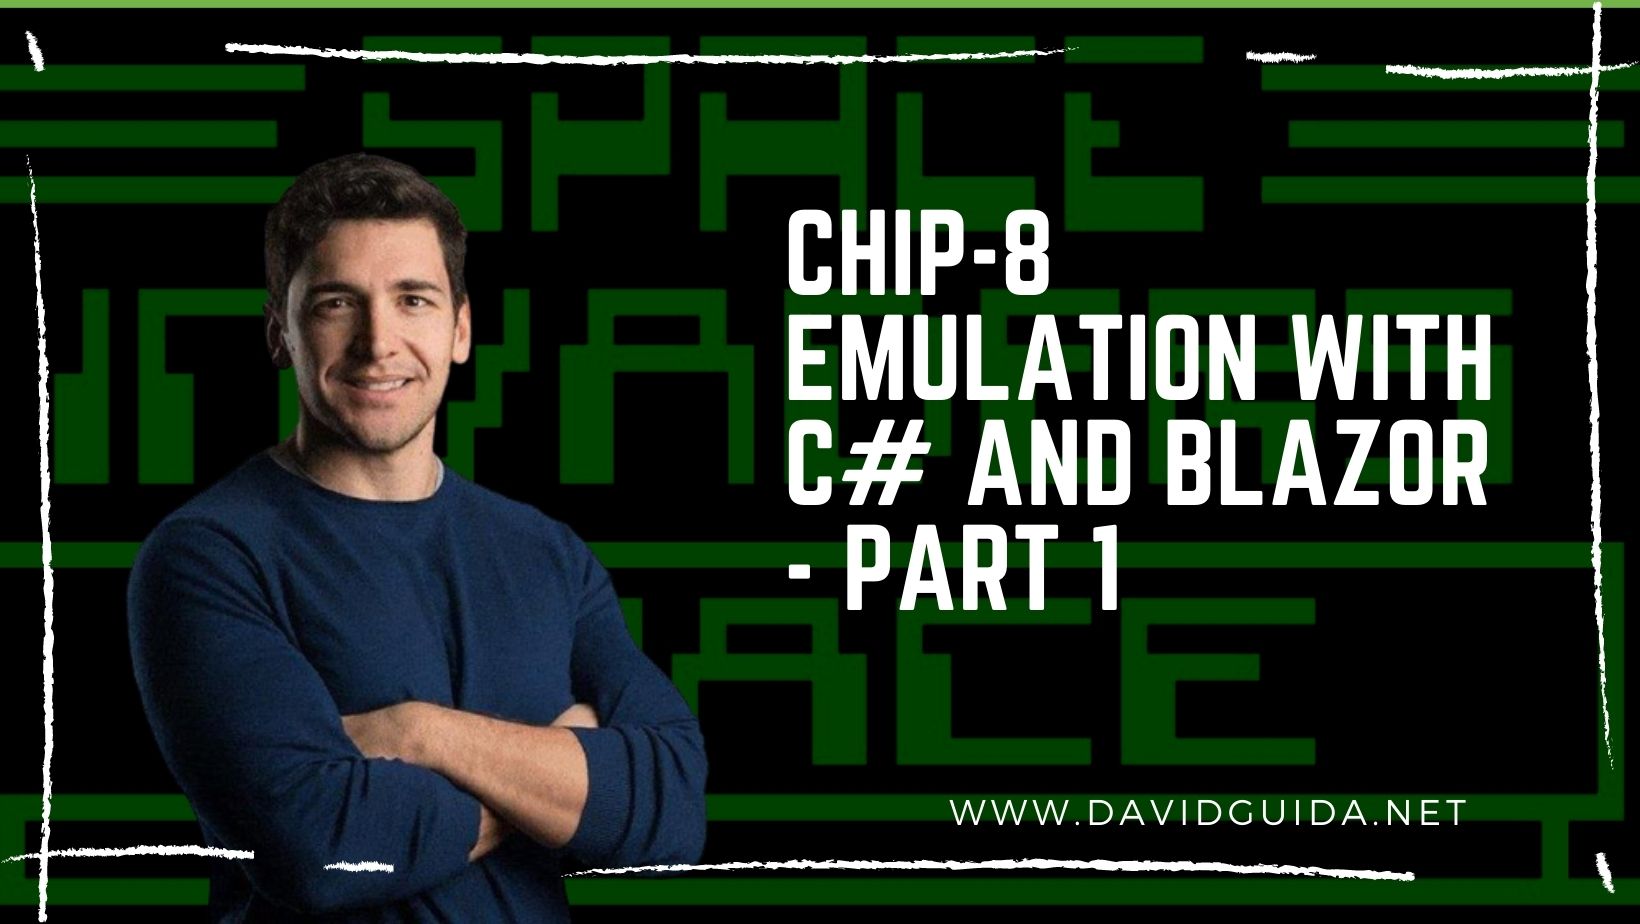 CHIP-8 emulation with C# and Blazor - part 1